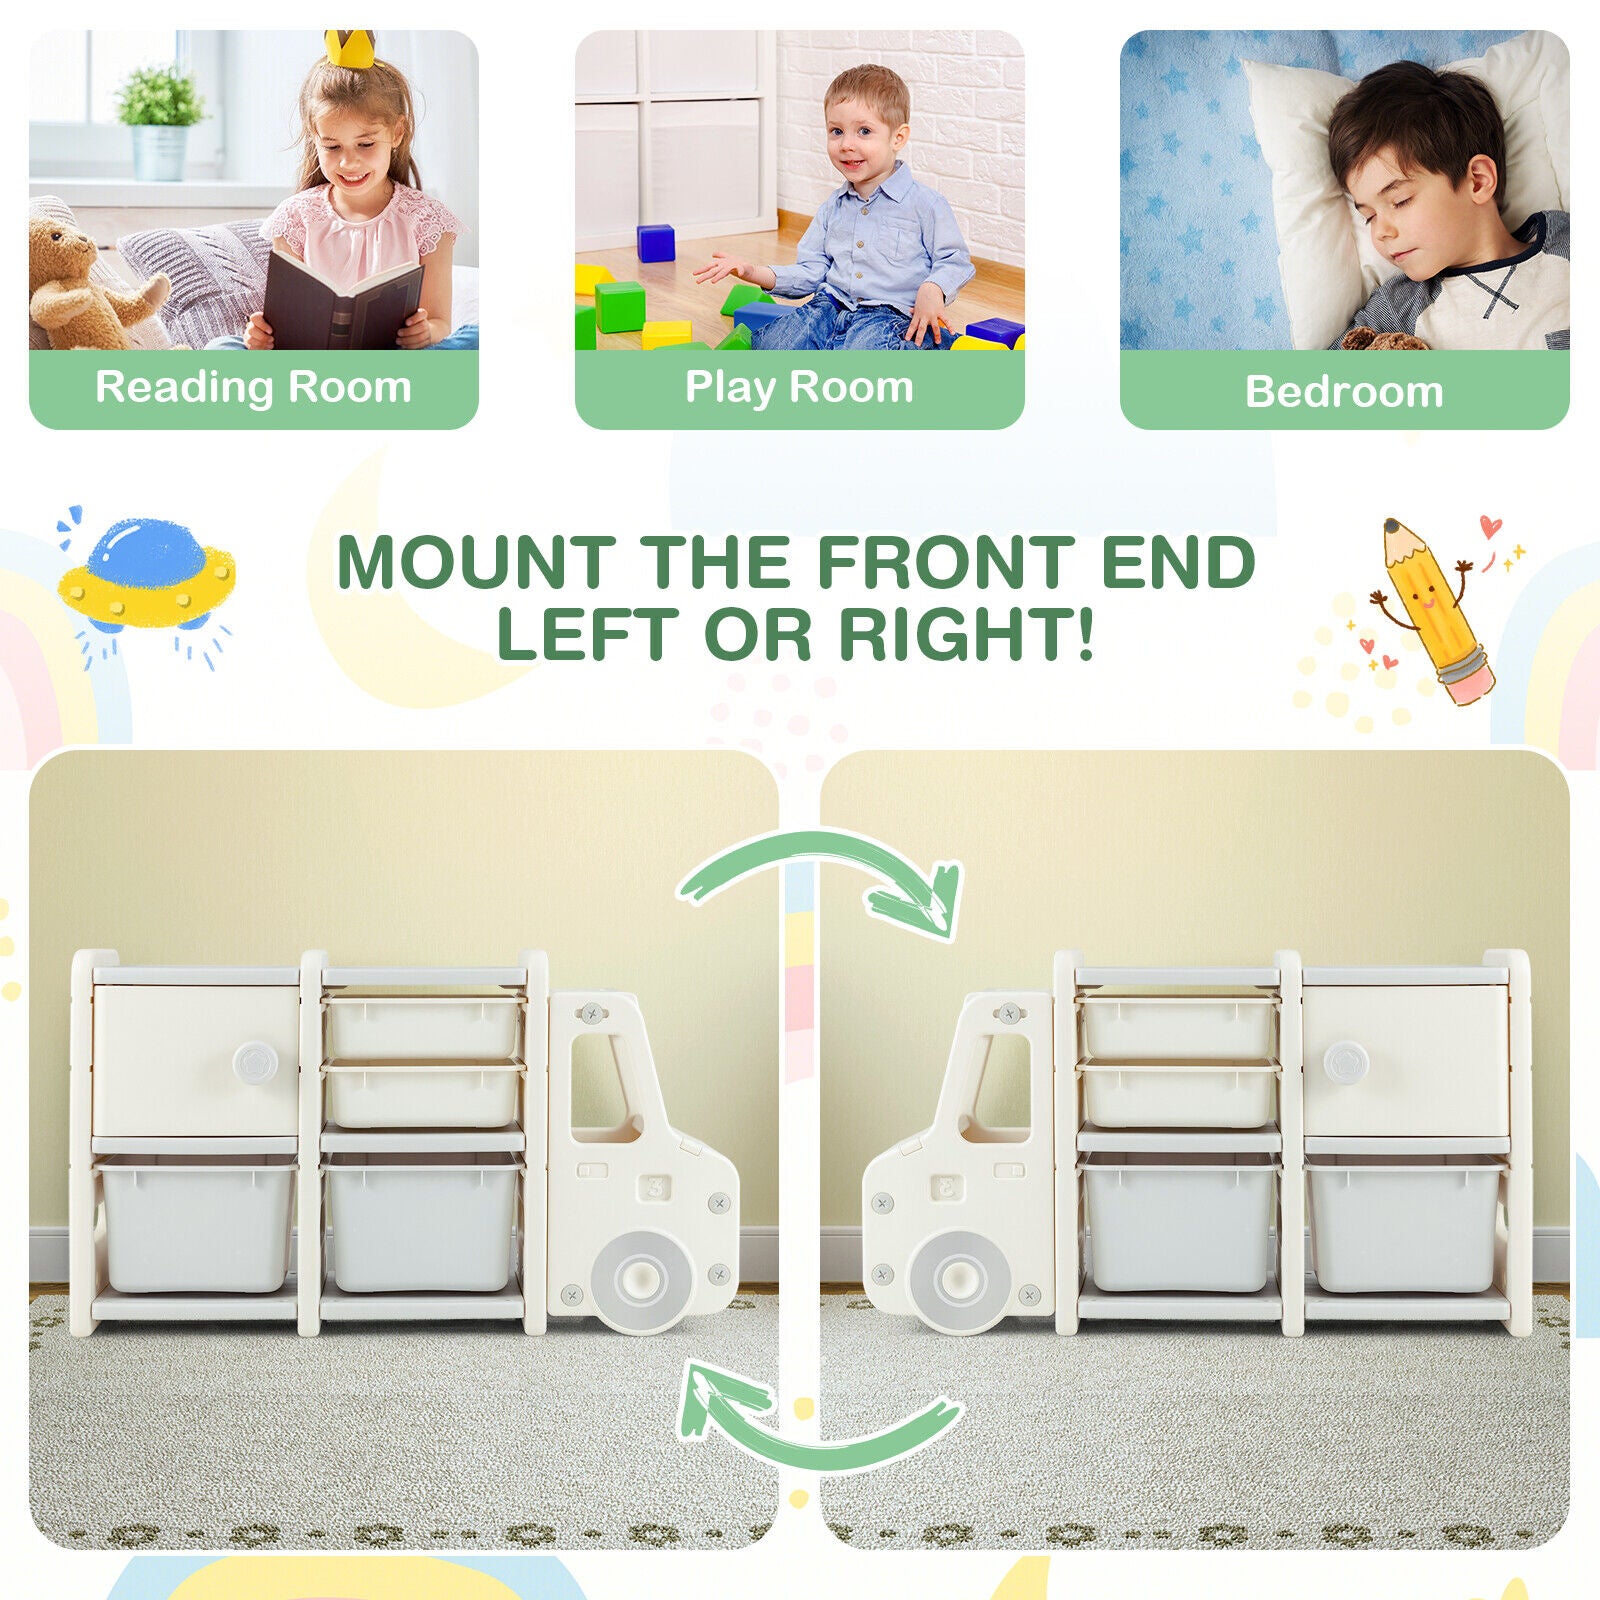 Adorable Truck-shaped Design: Featuring an appealing truck-shaped design, this toy chest captures kids' attention and makes a charming addition to their bedroom, playroom, reading room, or nursery. Its lightweight construction allows for easy mobility, making it suitable for use anywhere.